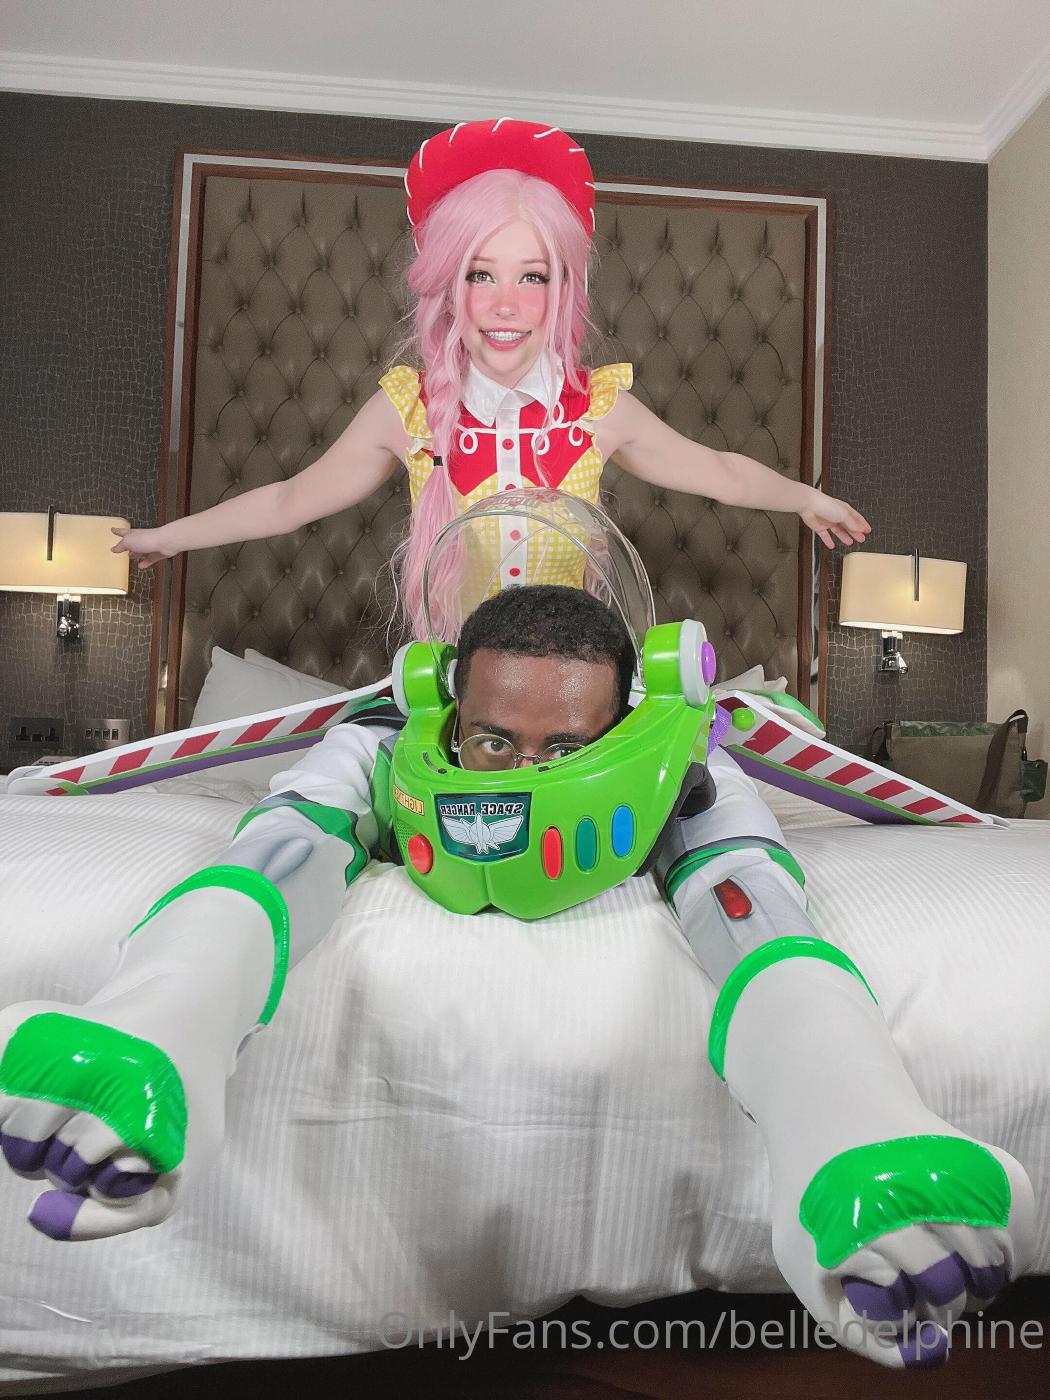 Twomad belle delphine leaked